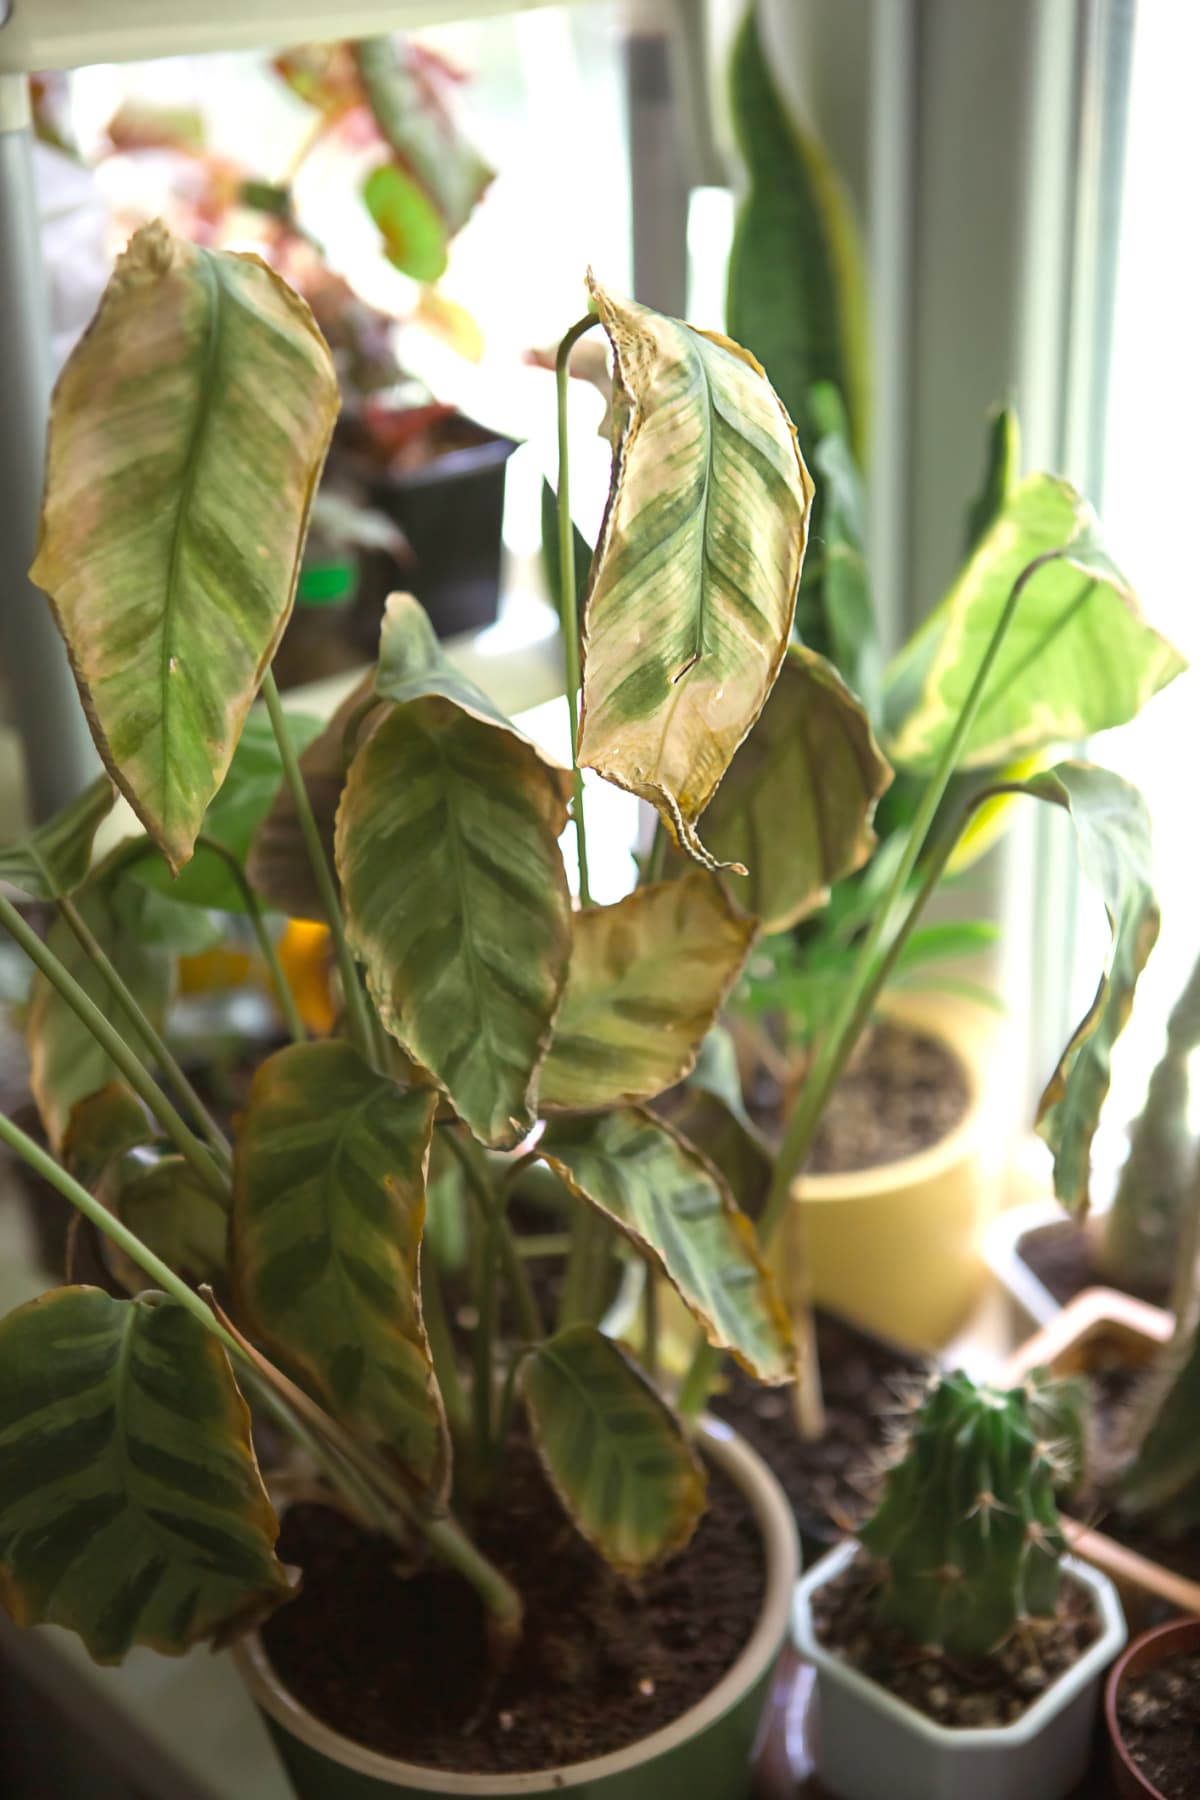 Wilting leaves affected by spider mites